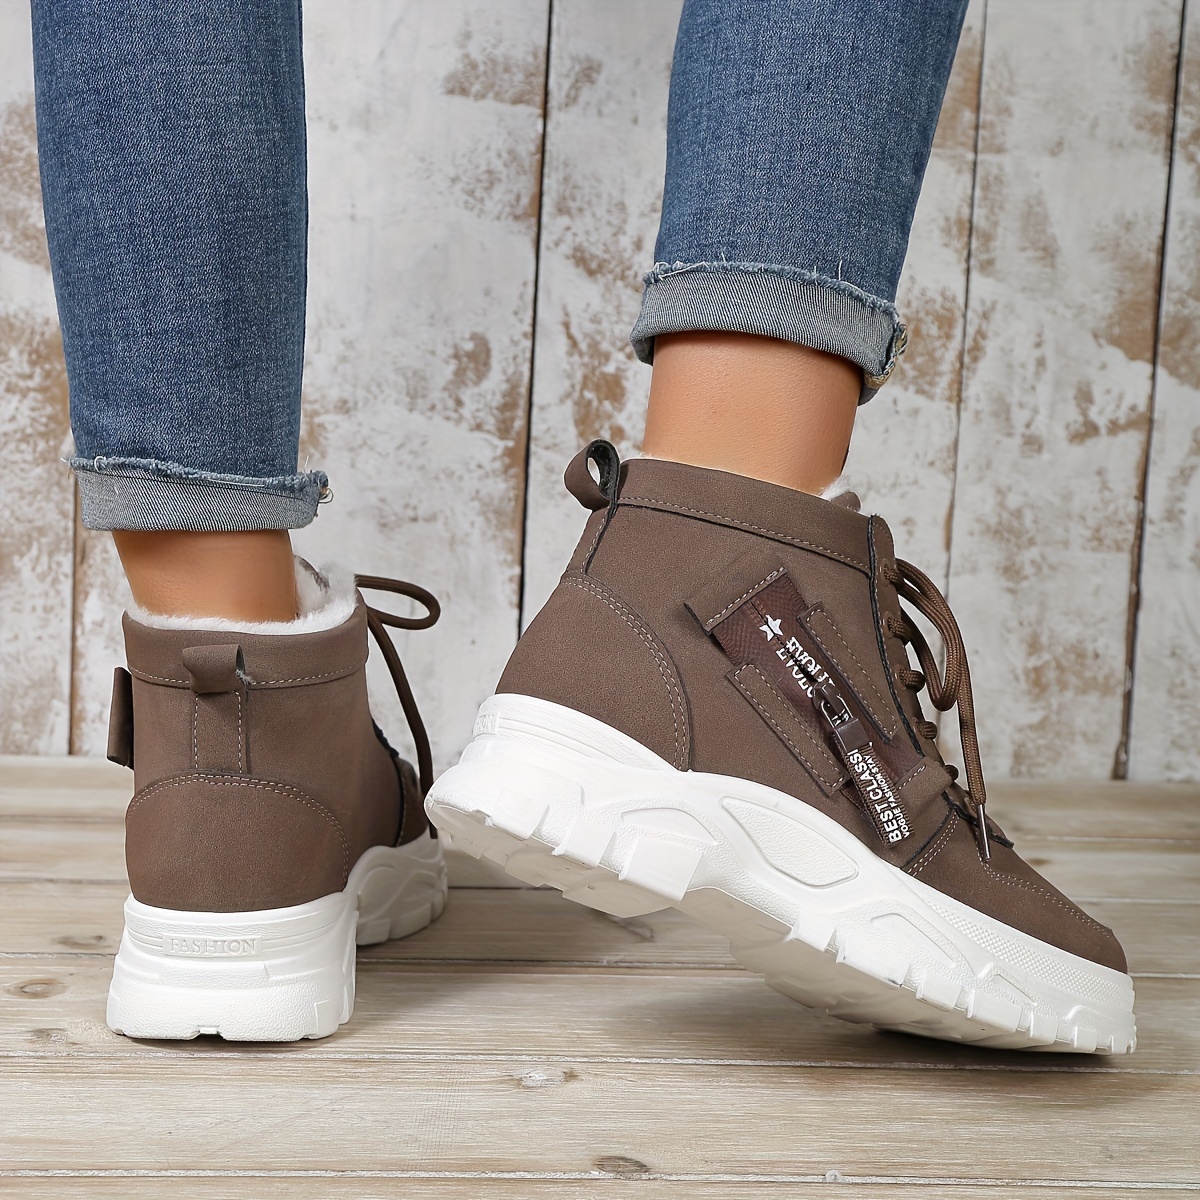 womens winter high top sneakers casual lace up plush lined boots comfortable side zipper short boots details 4